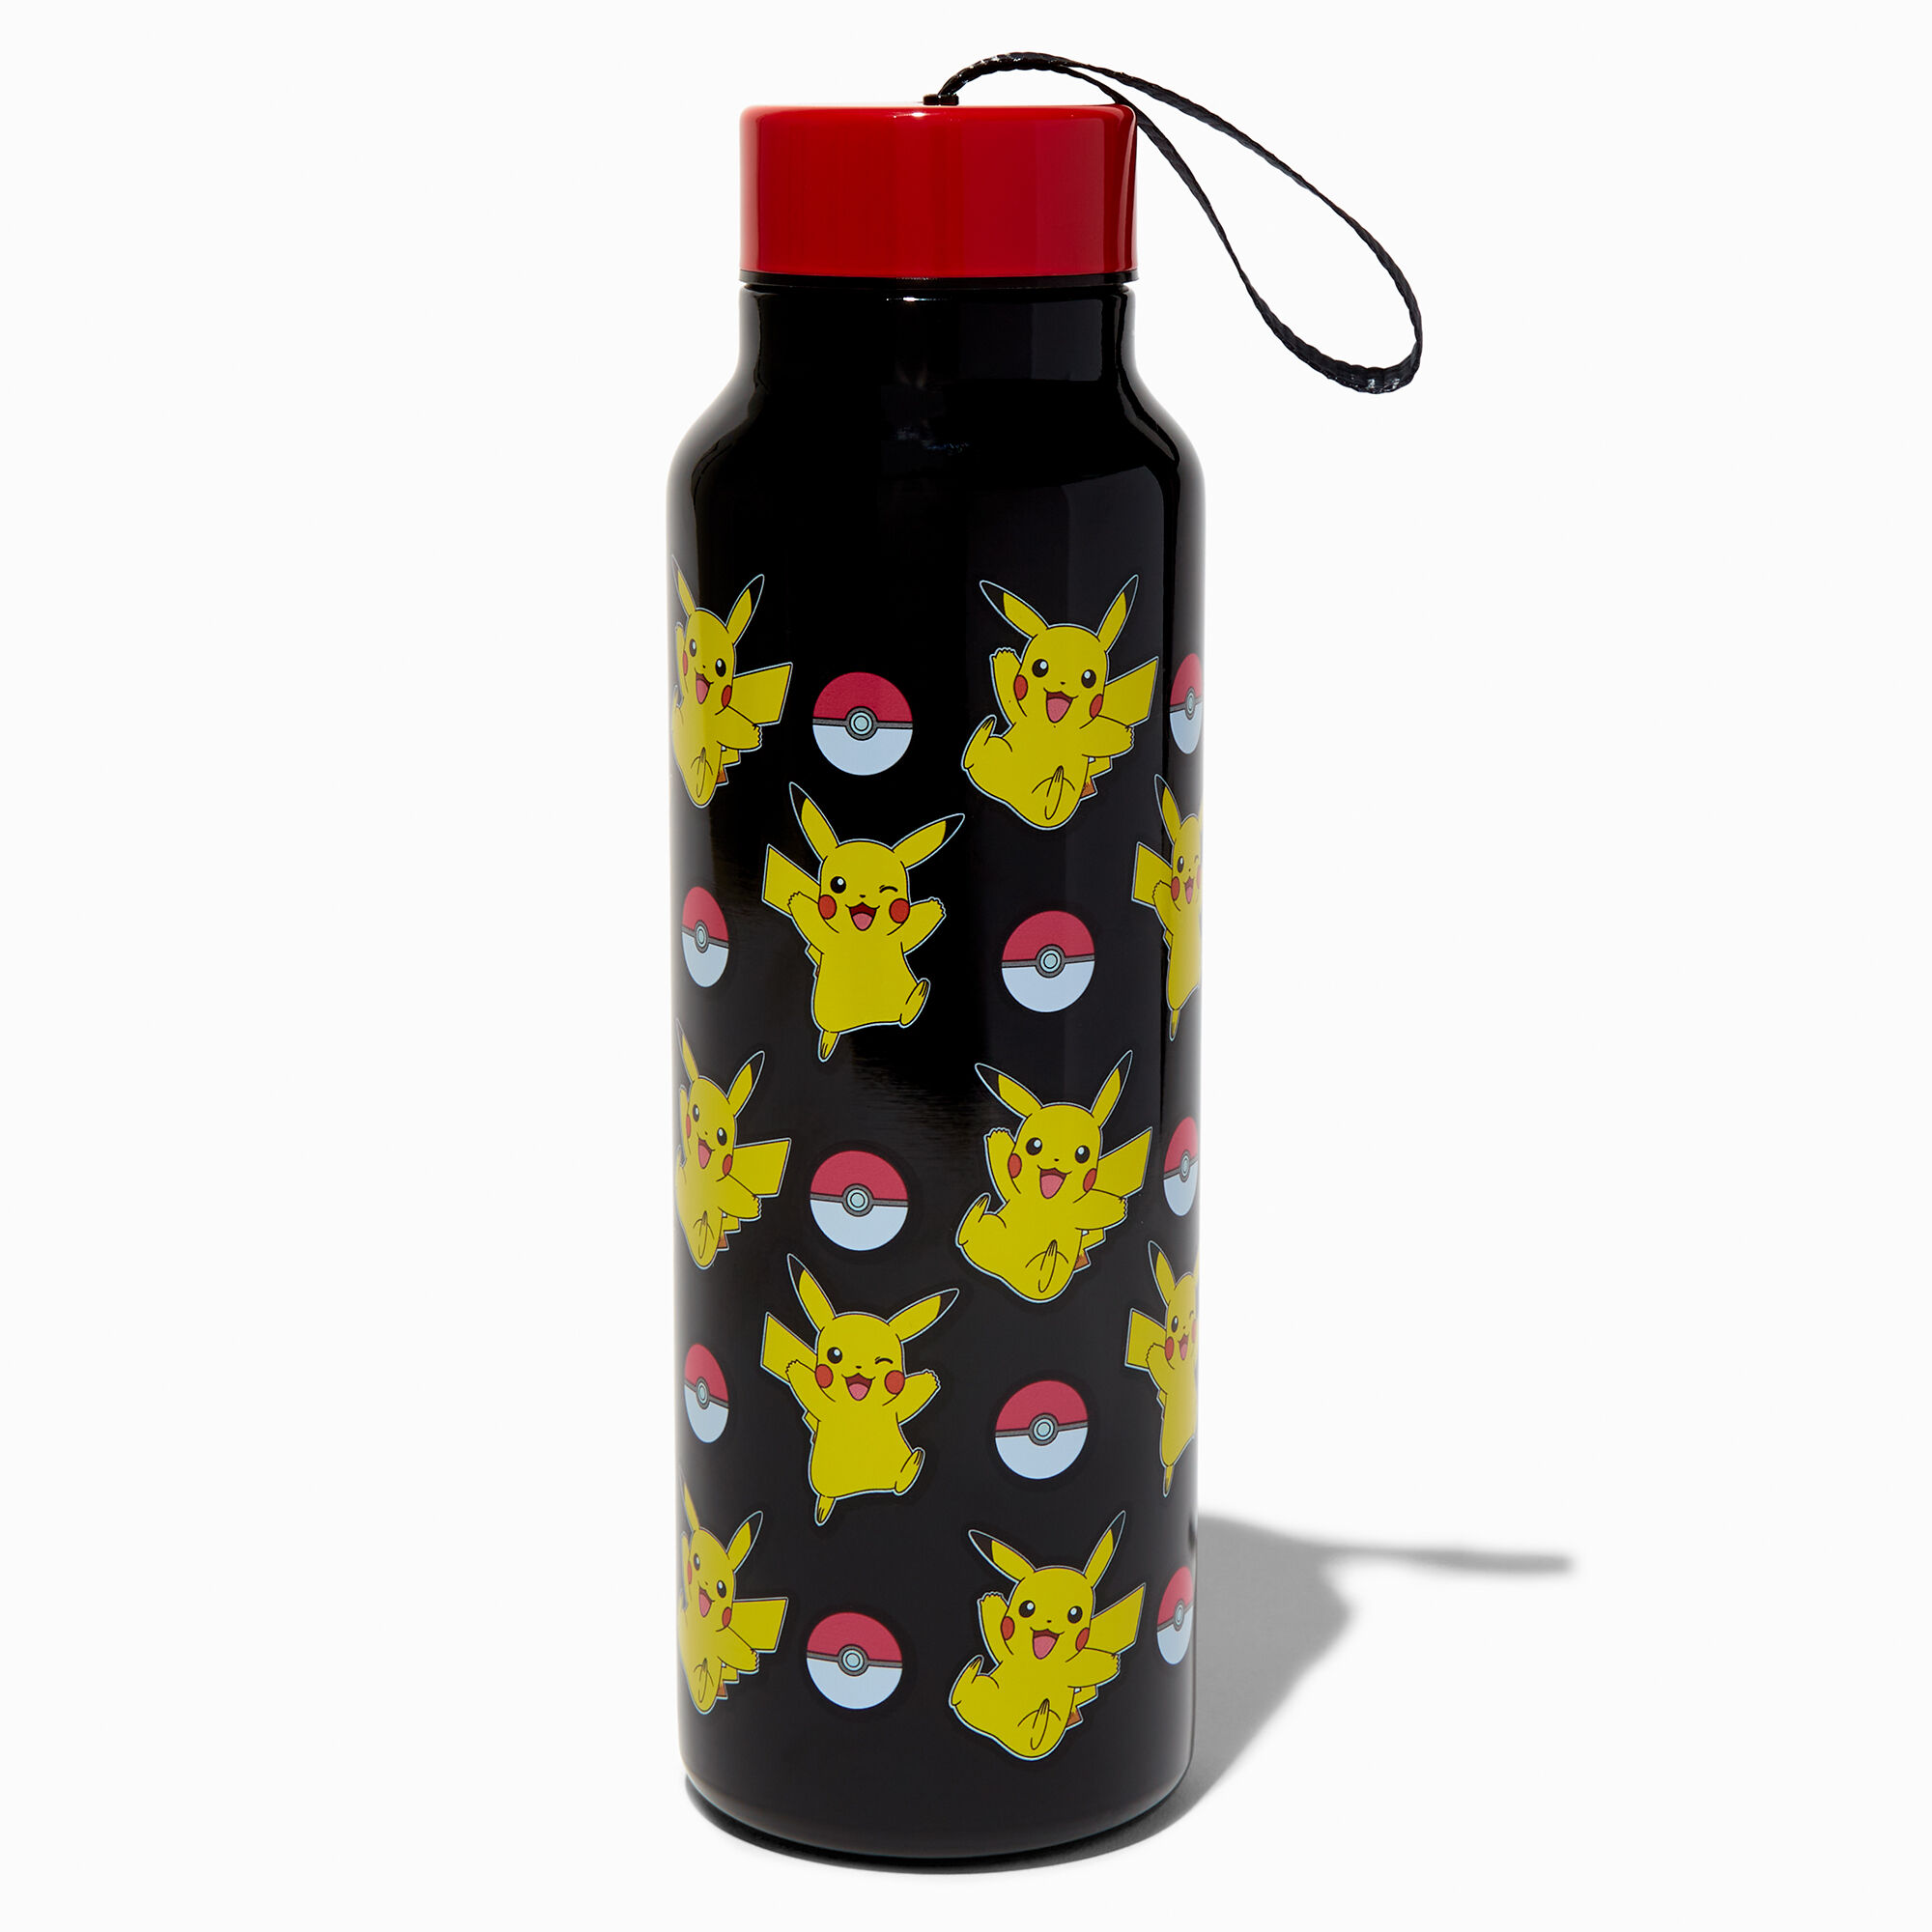 Claire's Pokémon Pikachu Stainless Steel Water Bottle